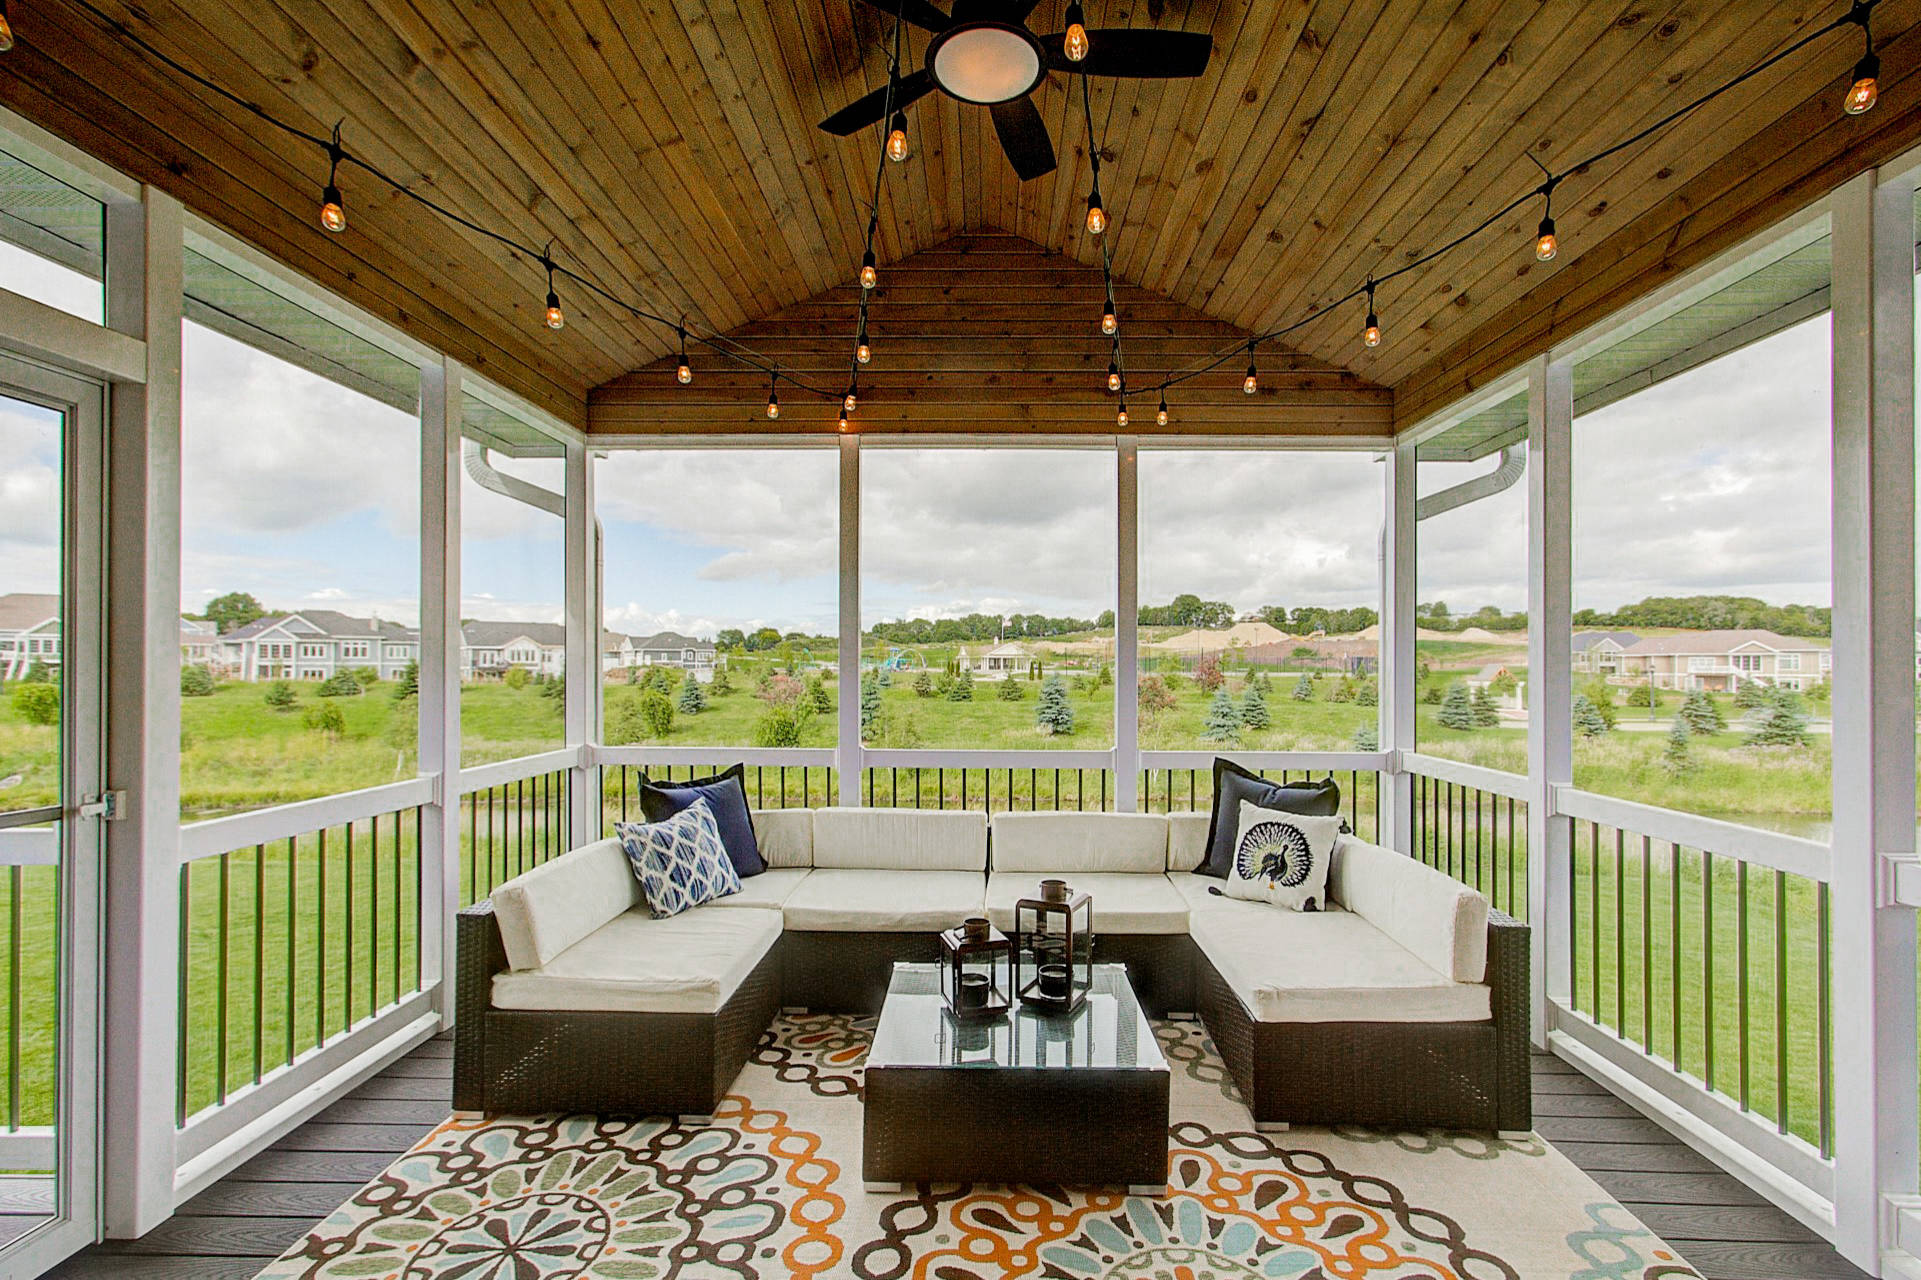 Discover Clever Privacy Ideas For Your Screened Porch That Will Leave